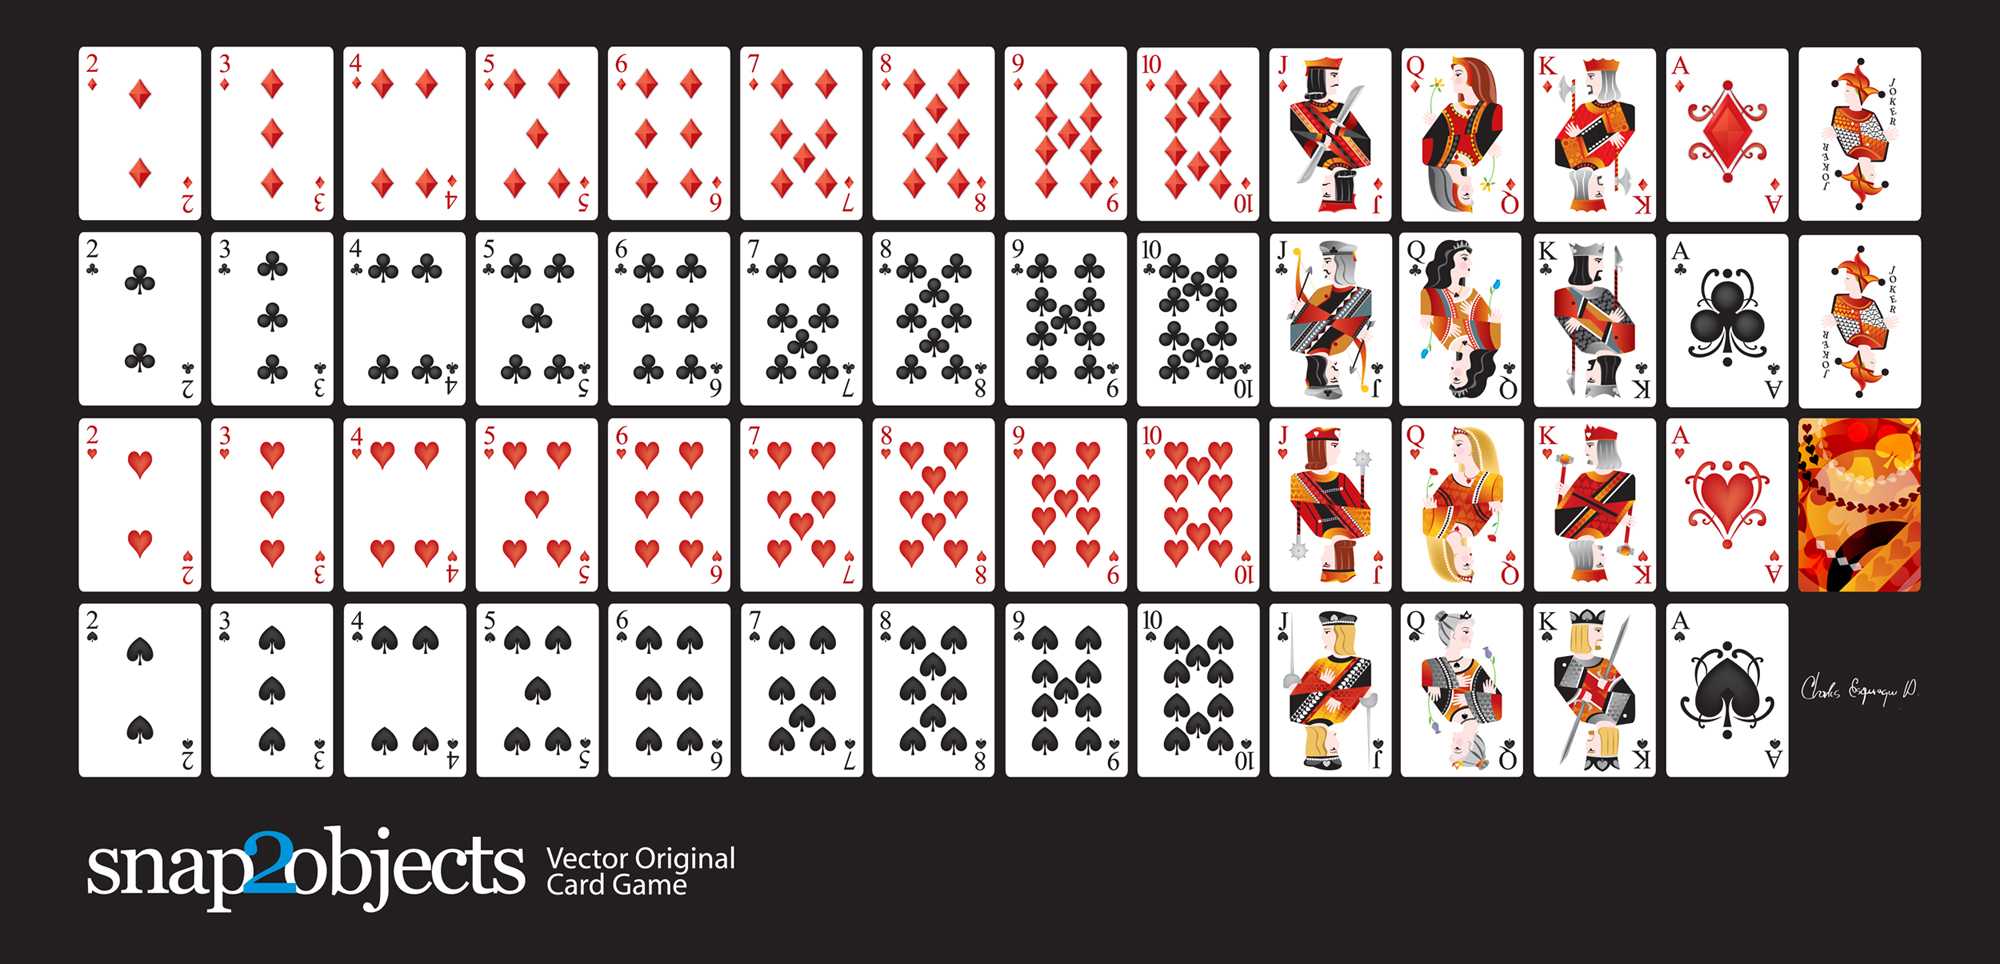 Playing Card Vector Art At Getdrawings | Free Download With Regard To Playing Card Design Template